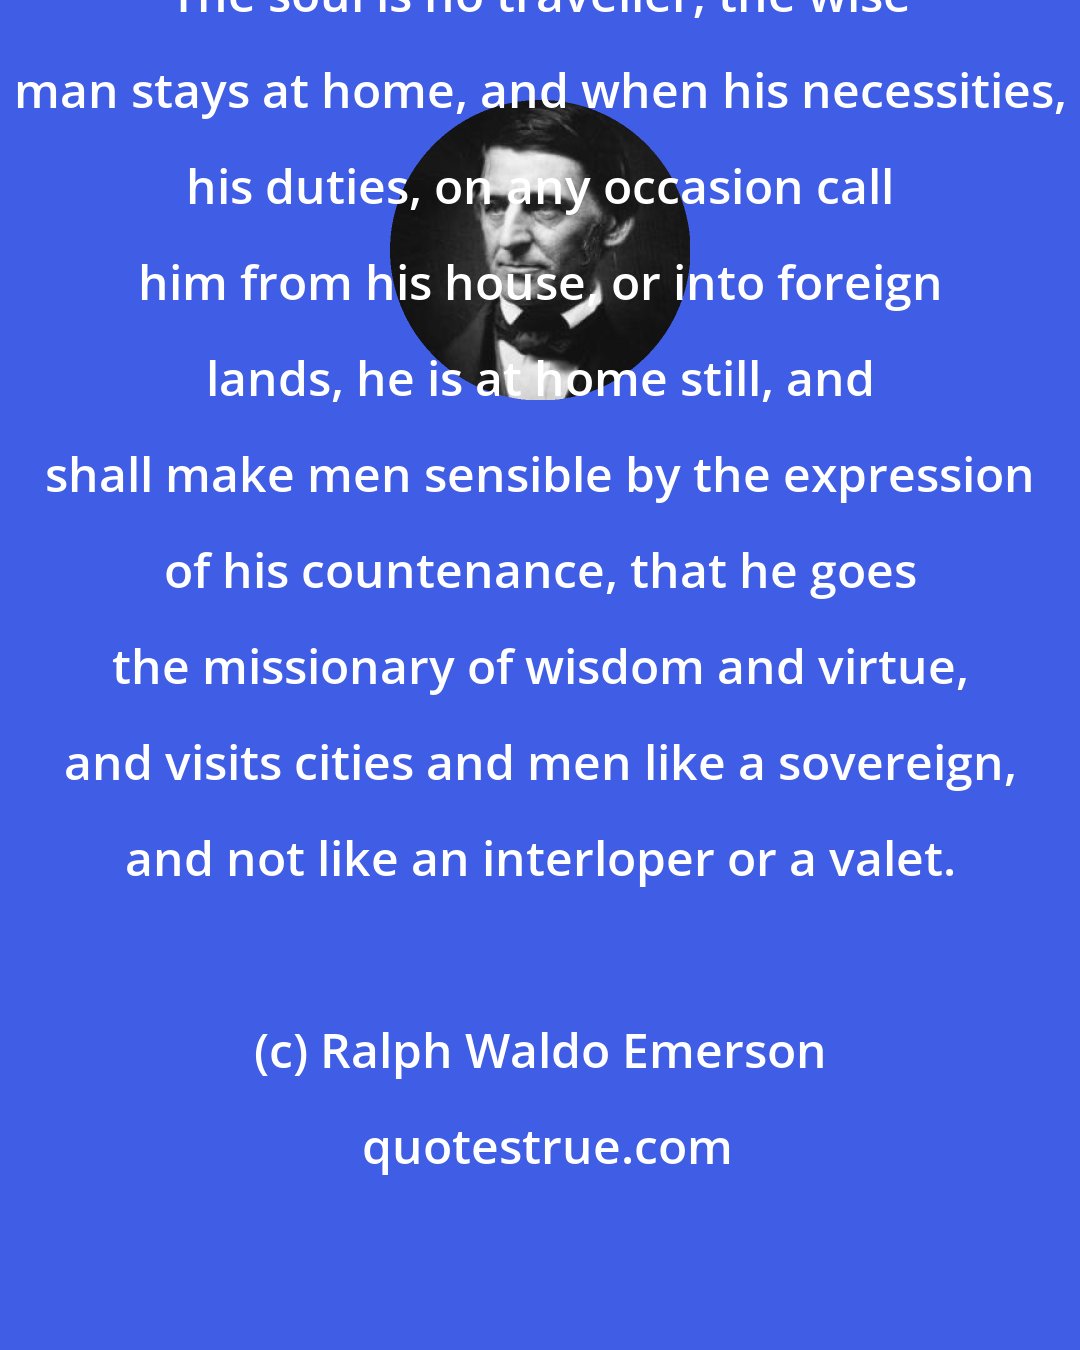 Ralph Waldo Emerson: The soul is no traveller; the wise man stays at home, and when his necessities, his duties, on any occasion call him from his house, or into foreign lands, he is at home still, and shall make men sensible by the expression of his countenance, that he goes the missionary of wisdom and virtue, and visits cities and men like a sovereign, and not like an interloper or a valet.